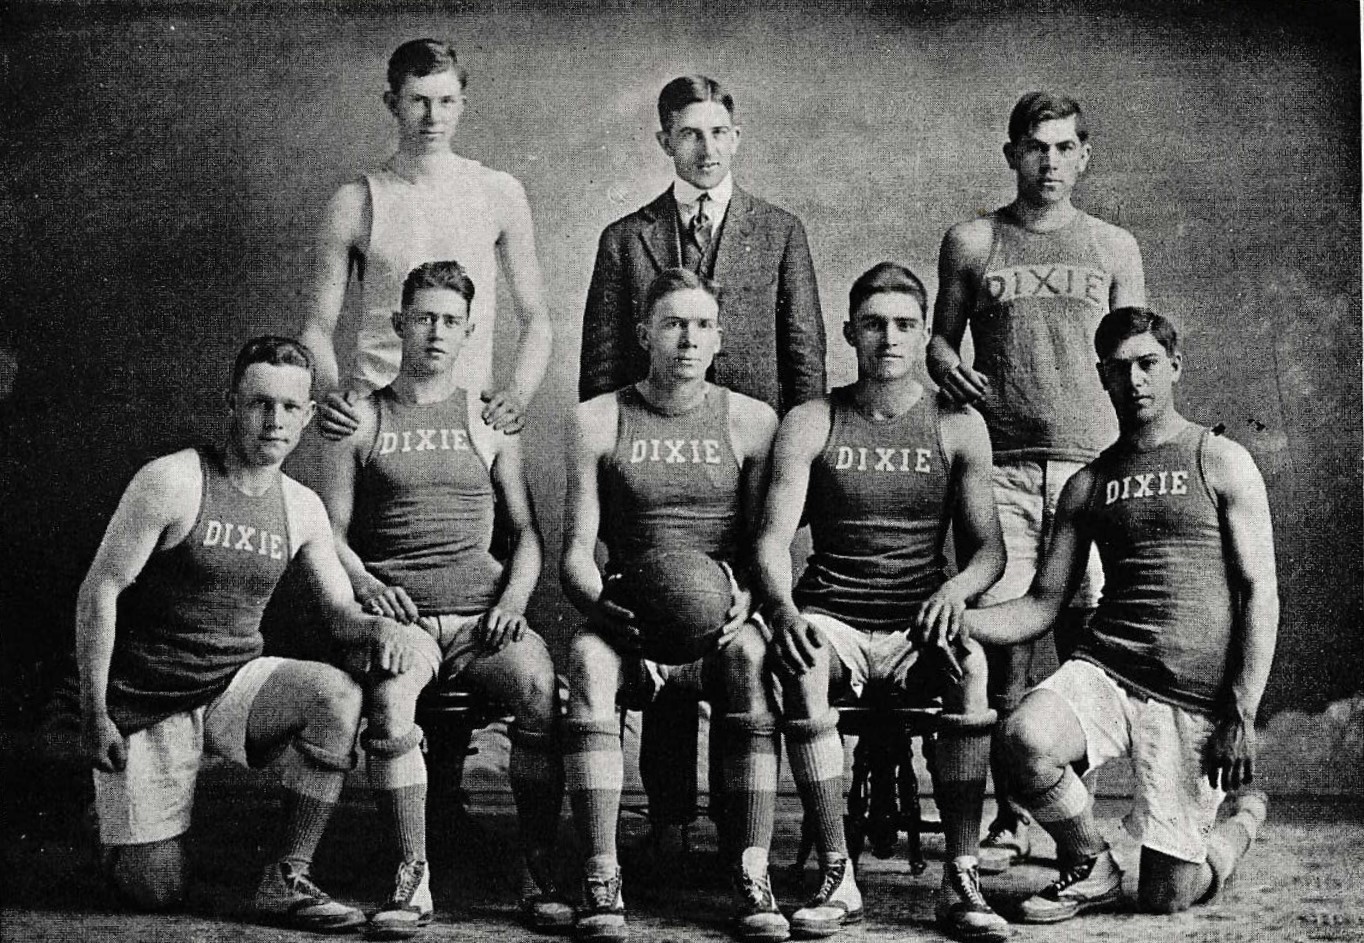 The Dixie Normal College basketball team in 1915-1916